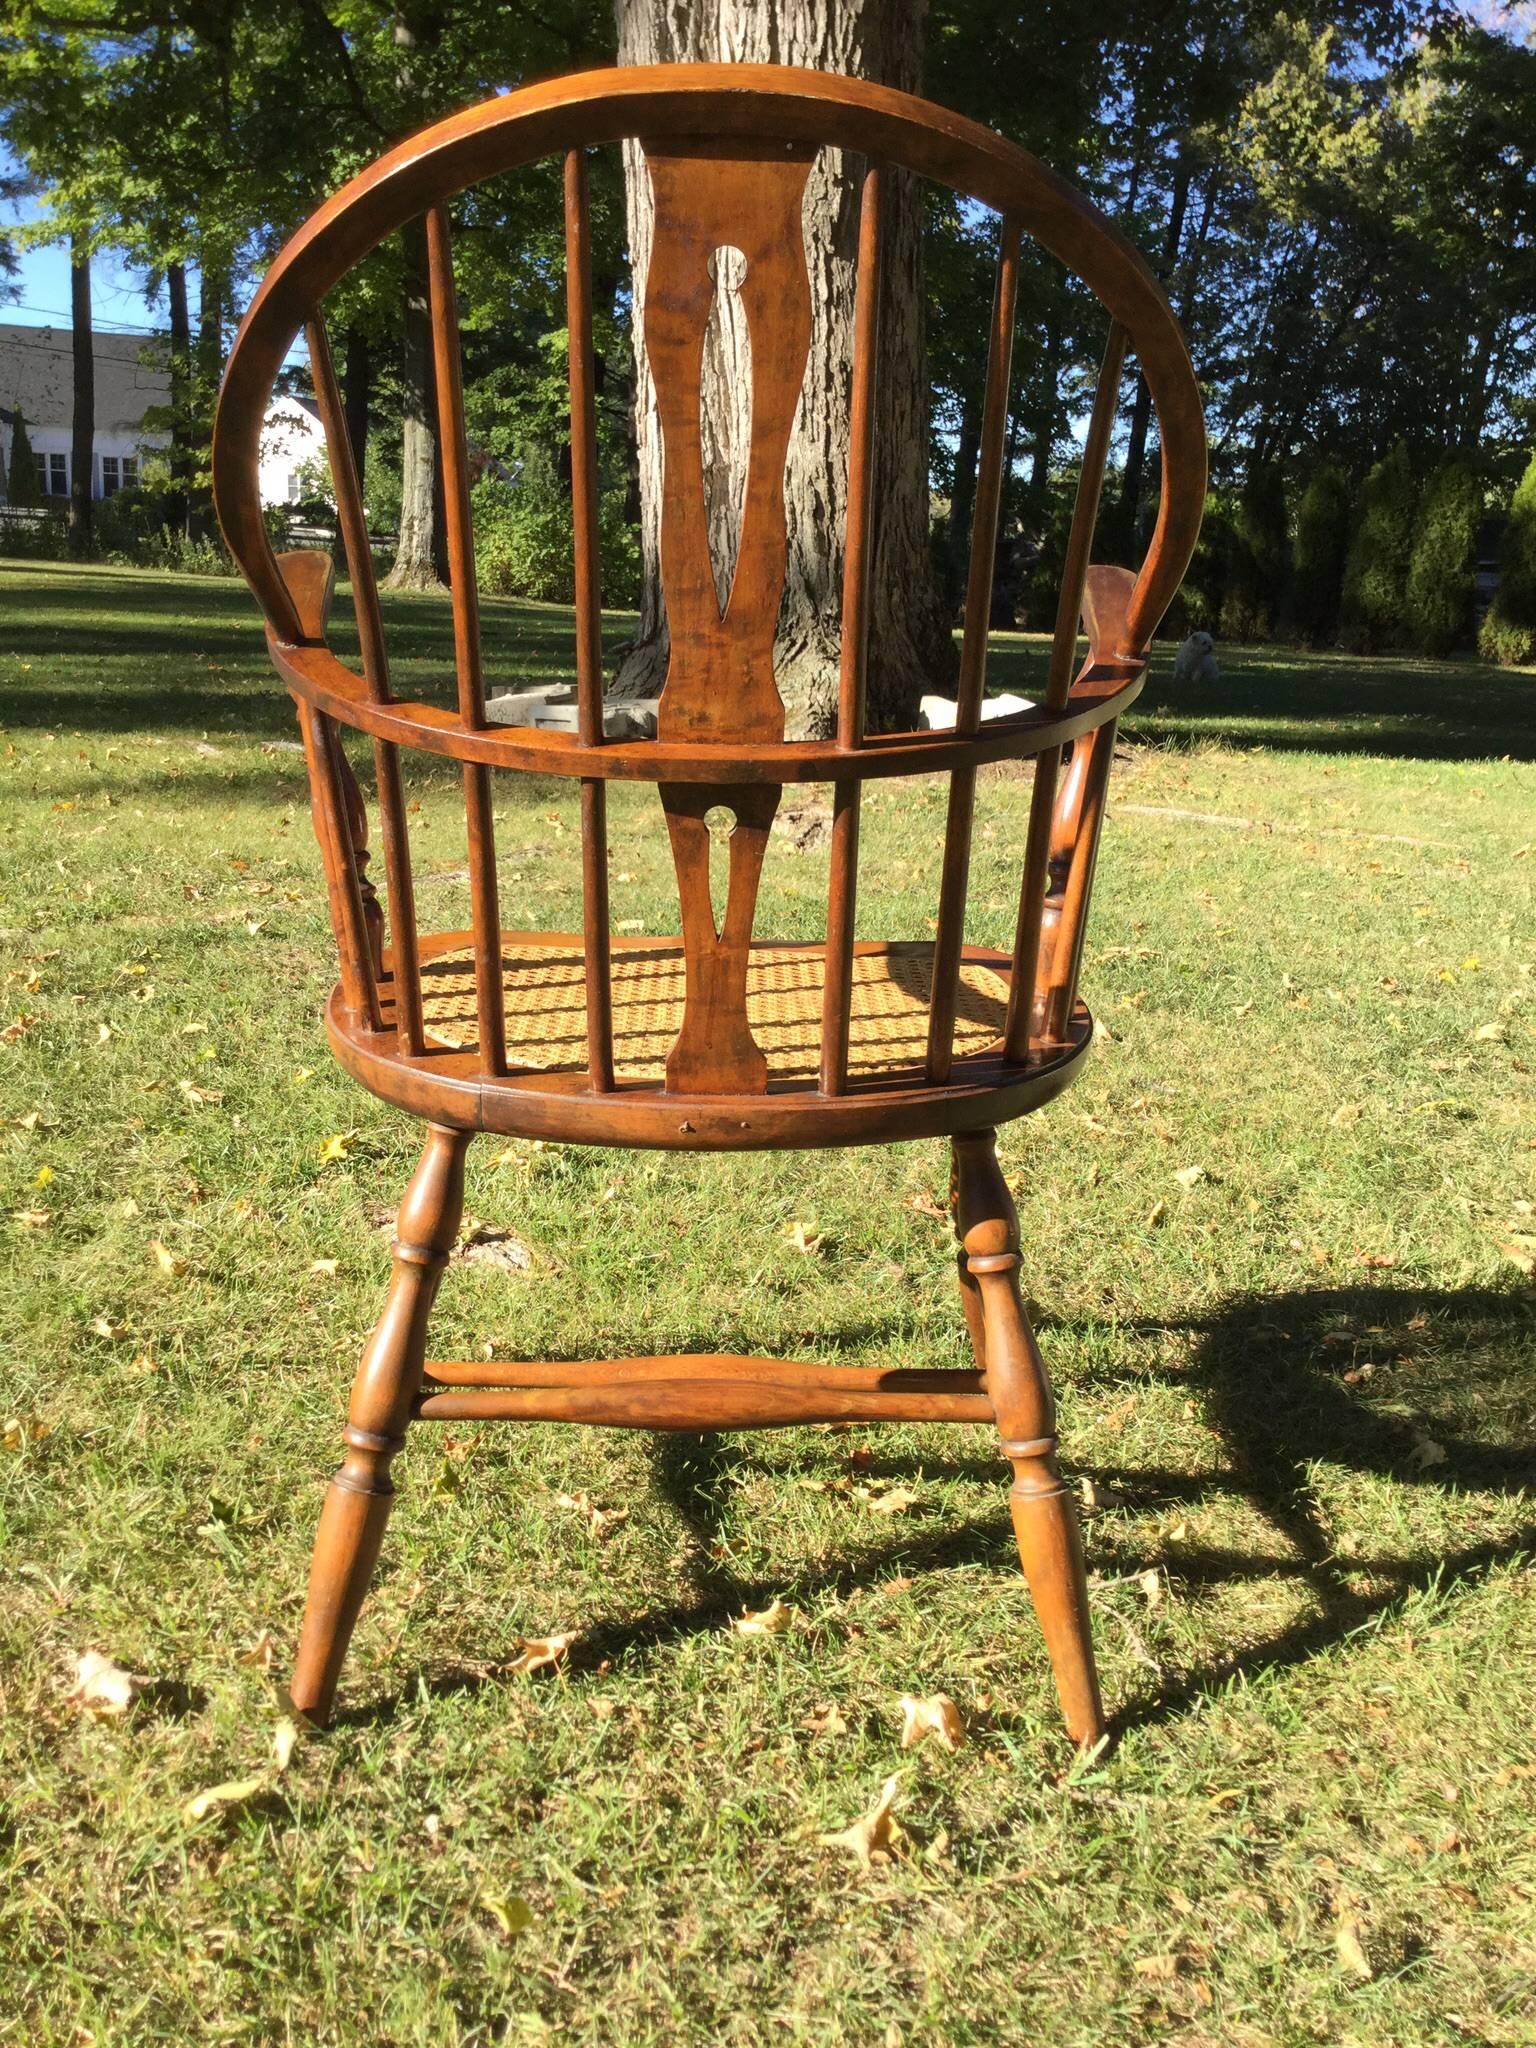 Fresh from an estate in the Berkshires. A great wooden chair with a wonderful aged patina. Looks like the cane seat may have been redone at some point later. Great condition.